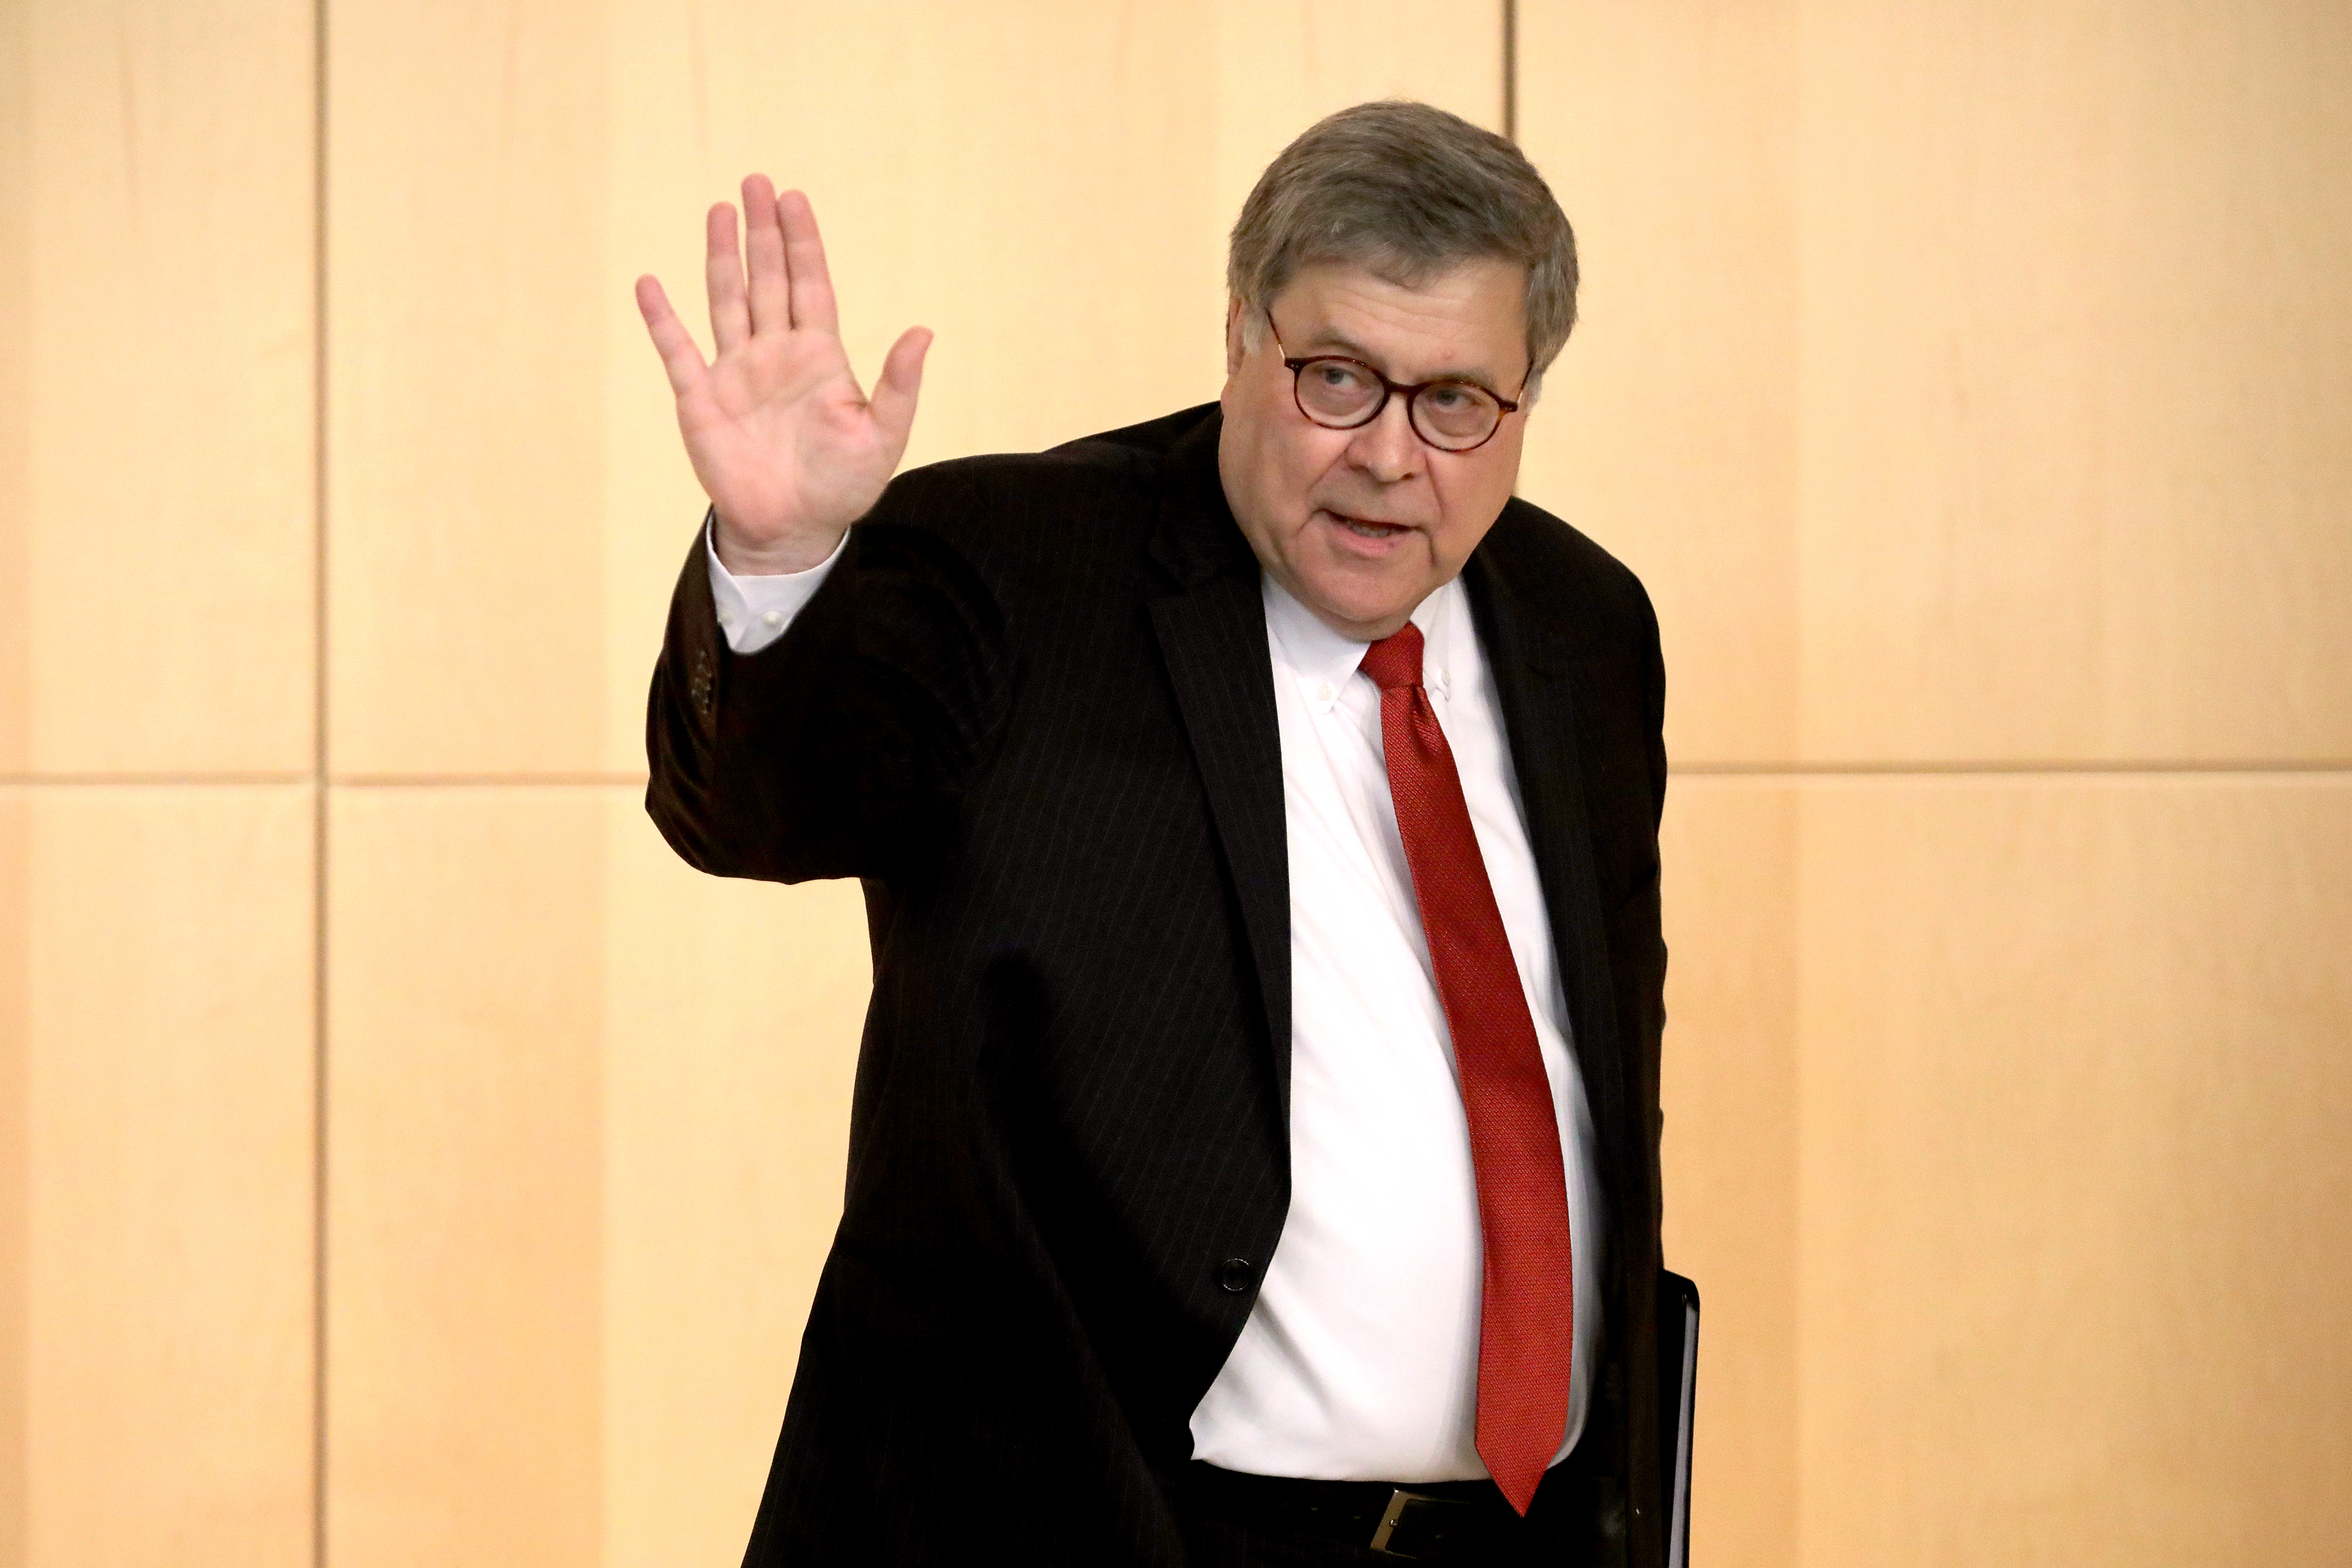 WASHINGTON, DC - OCTOBER 03: U.S. Attorney General William Barr waves goodbye after delivering remarks during the Criminal Coordination Conference at the Securities and Exchange Commission October 03, 2019 in Washington, DC. Barr reportedly traveled to Rome last week to meet with Italian intelligence officers as part of President Donald Trump’s efforts to discredit the investigation into Russian meddling in the 2016 United States election. (Photo by Chip Somodevilla/Getty Images)